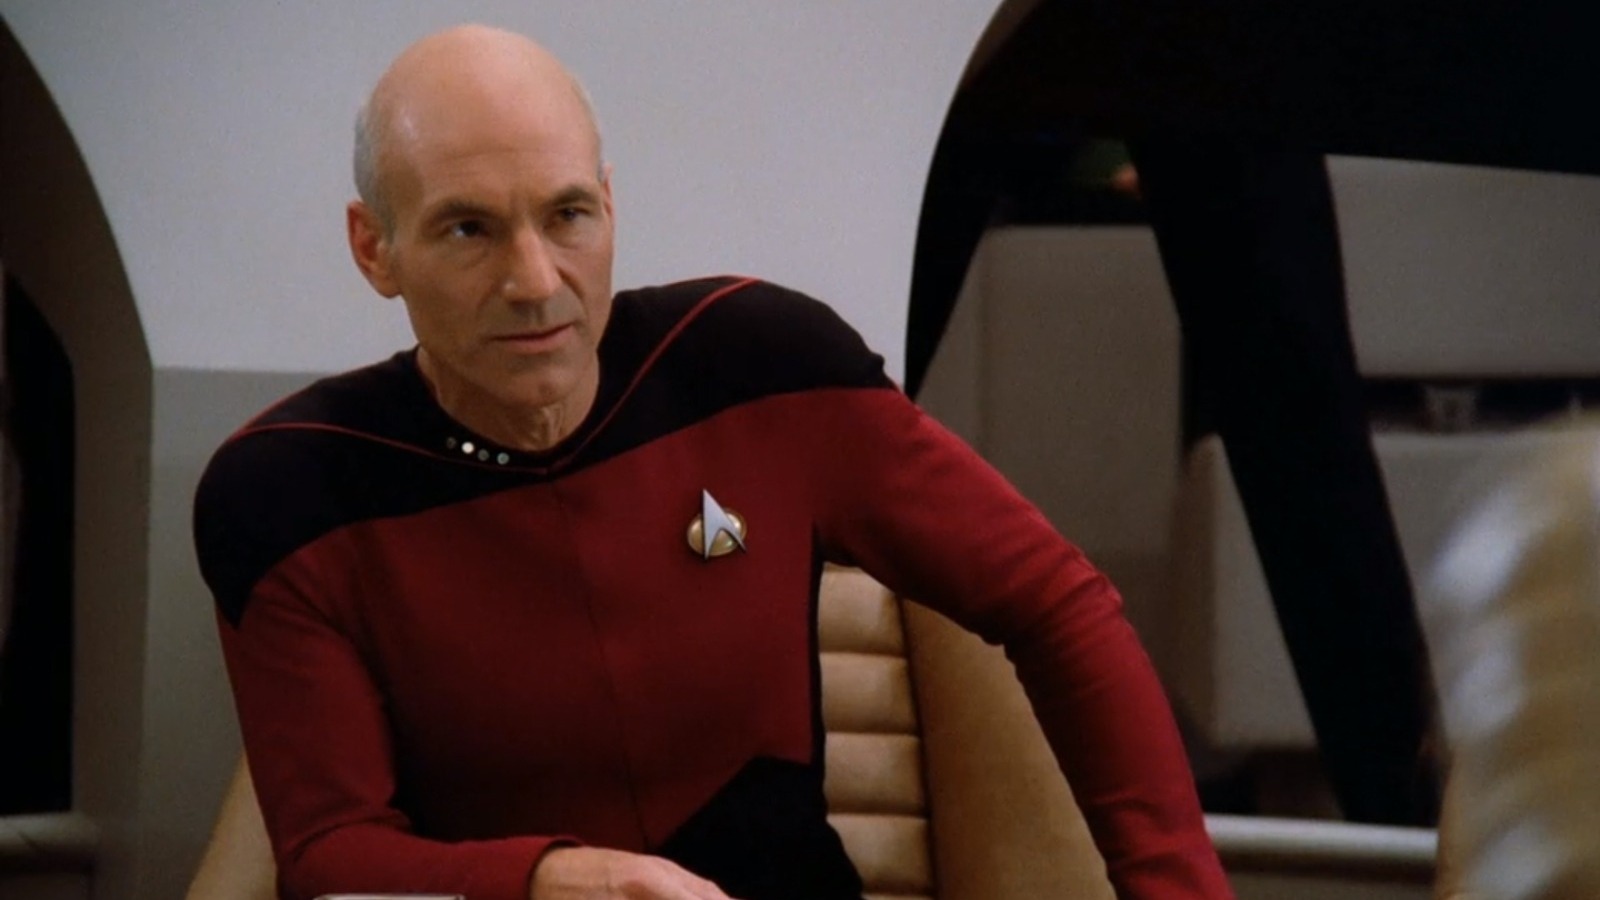 Patrick Stewart Wore A Wig For His Star Trek Audition – But His Baldness May Have Sealed The Deal